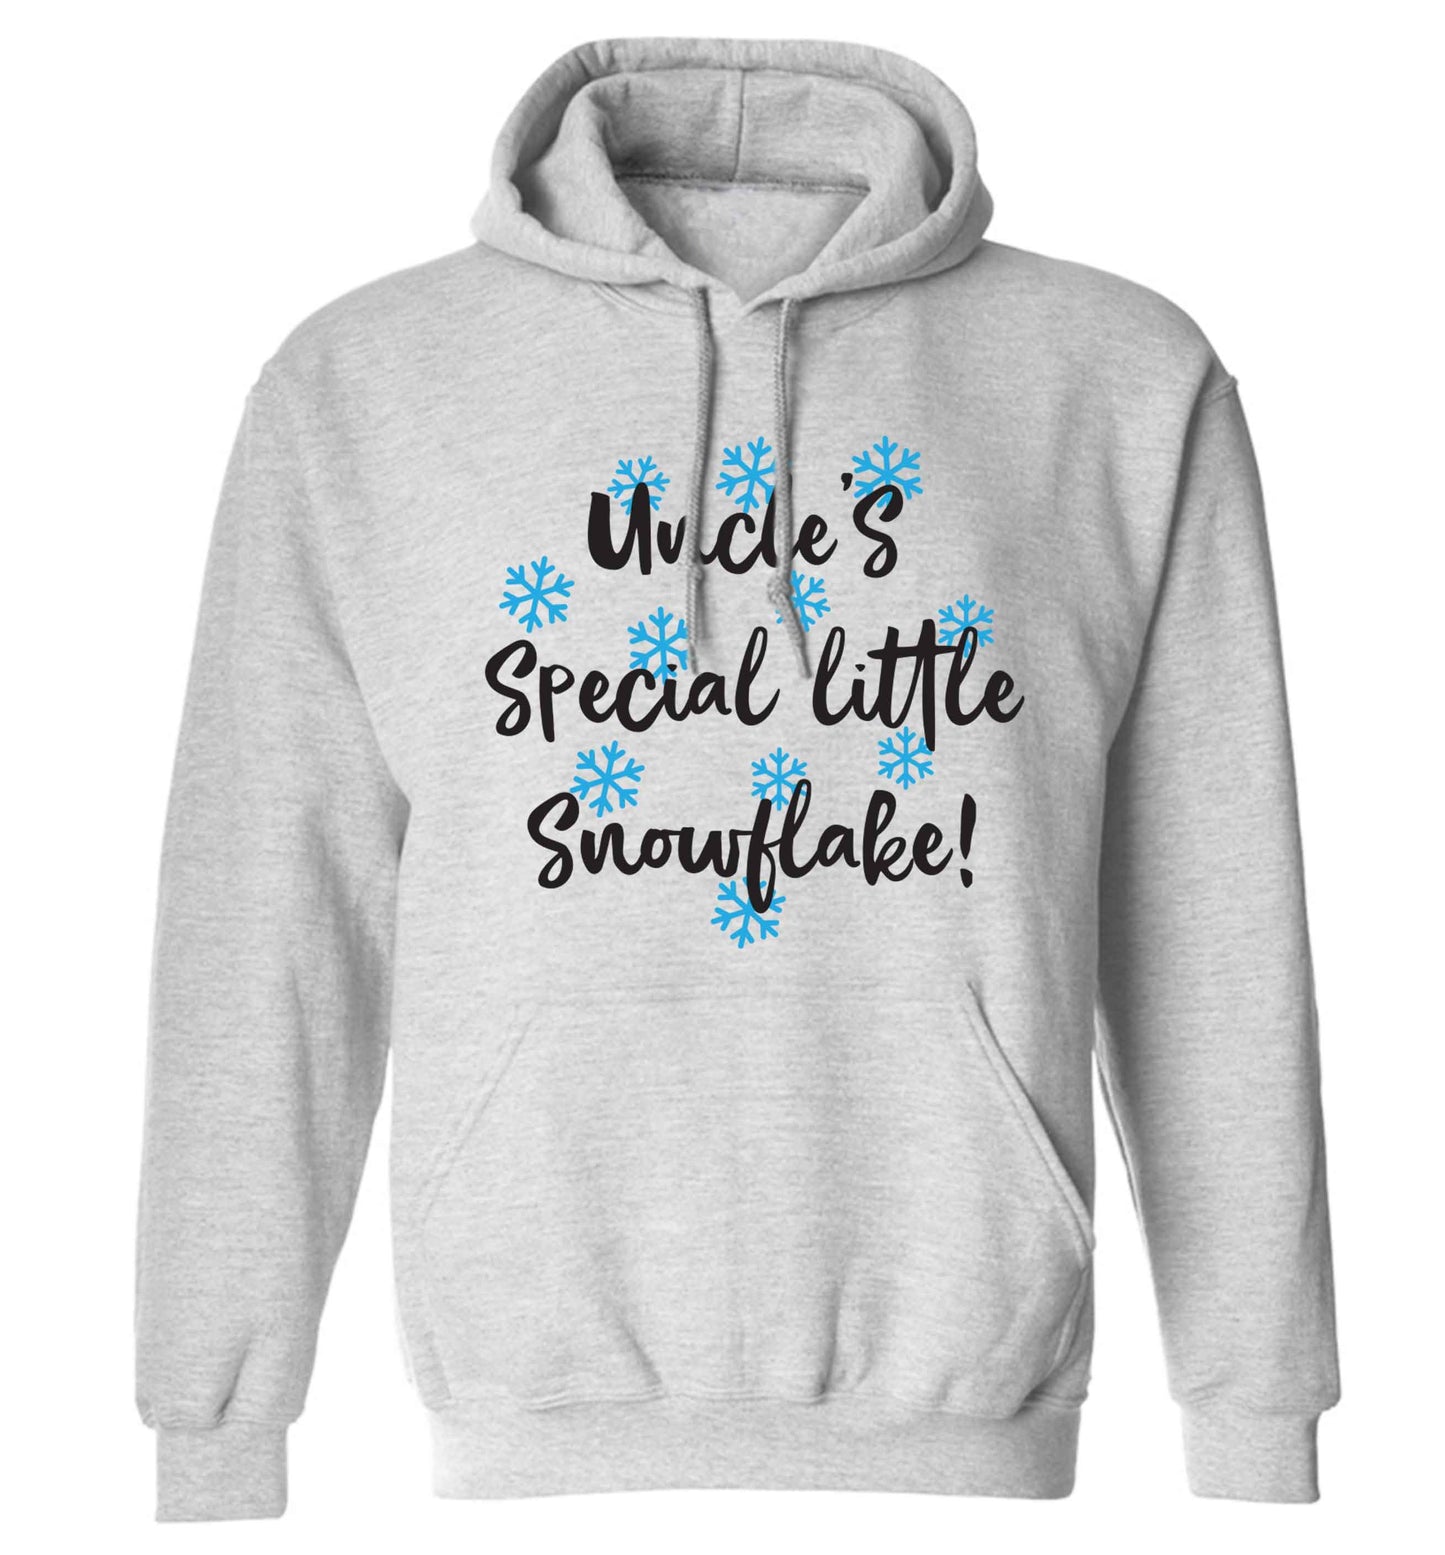 Uncle's special little snowflake adults unisex grey hoodie 2XL